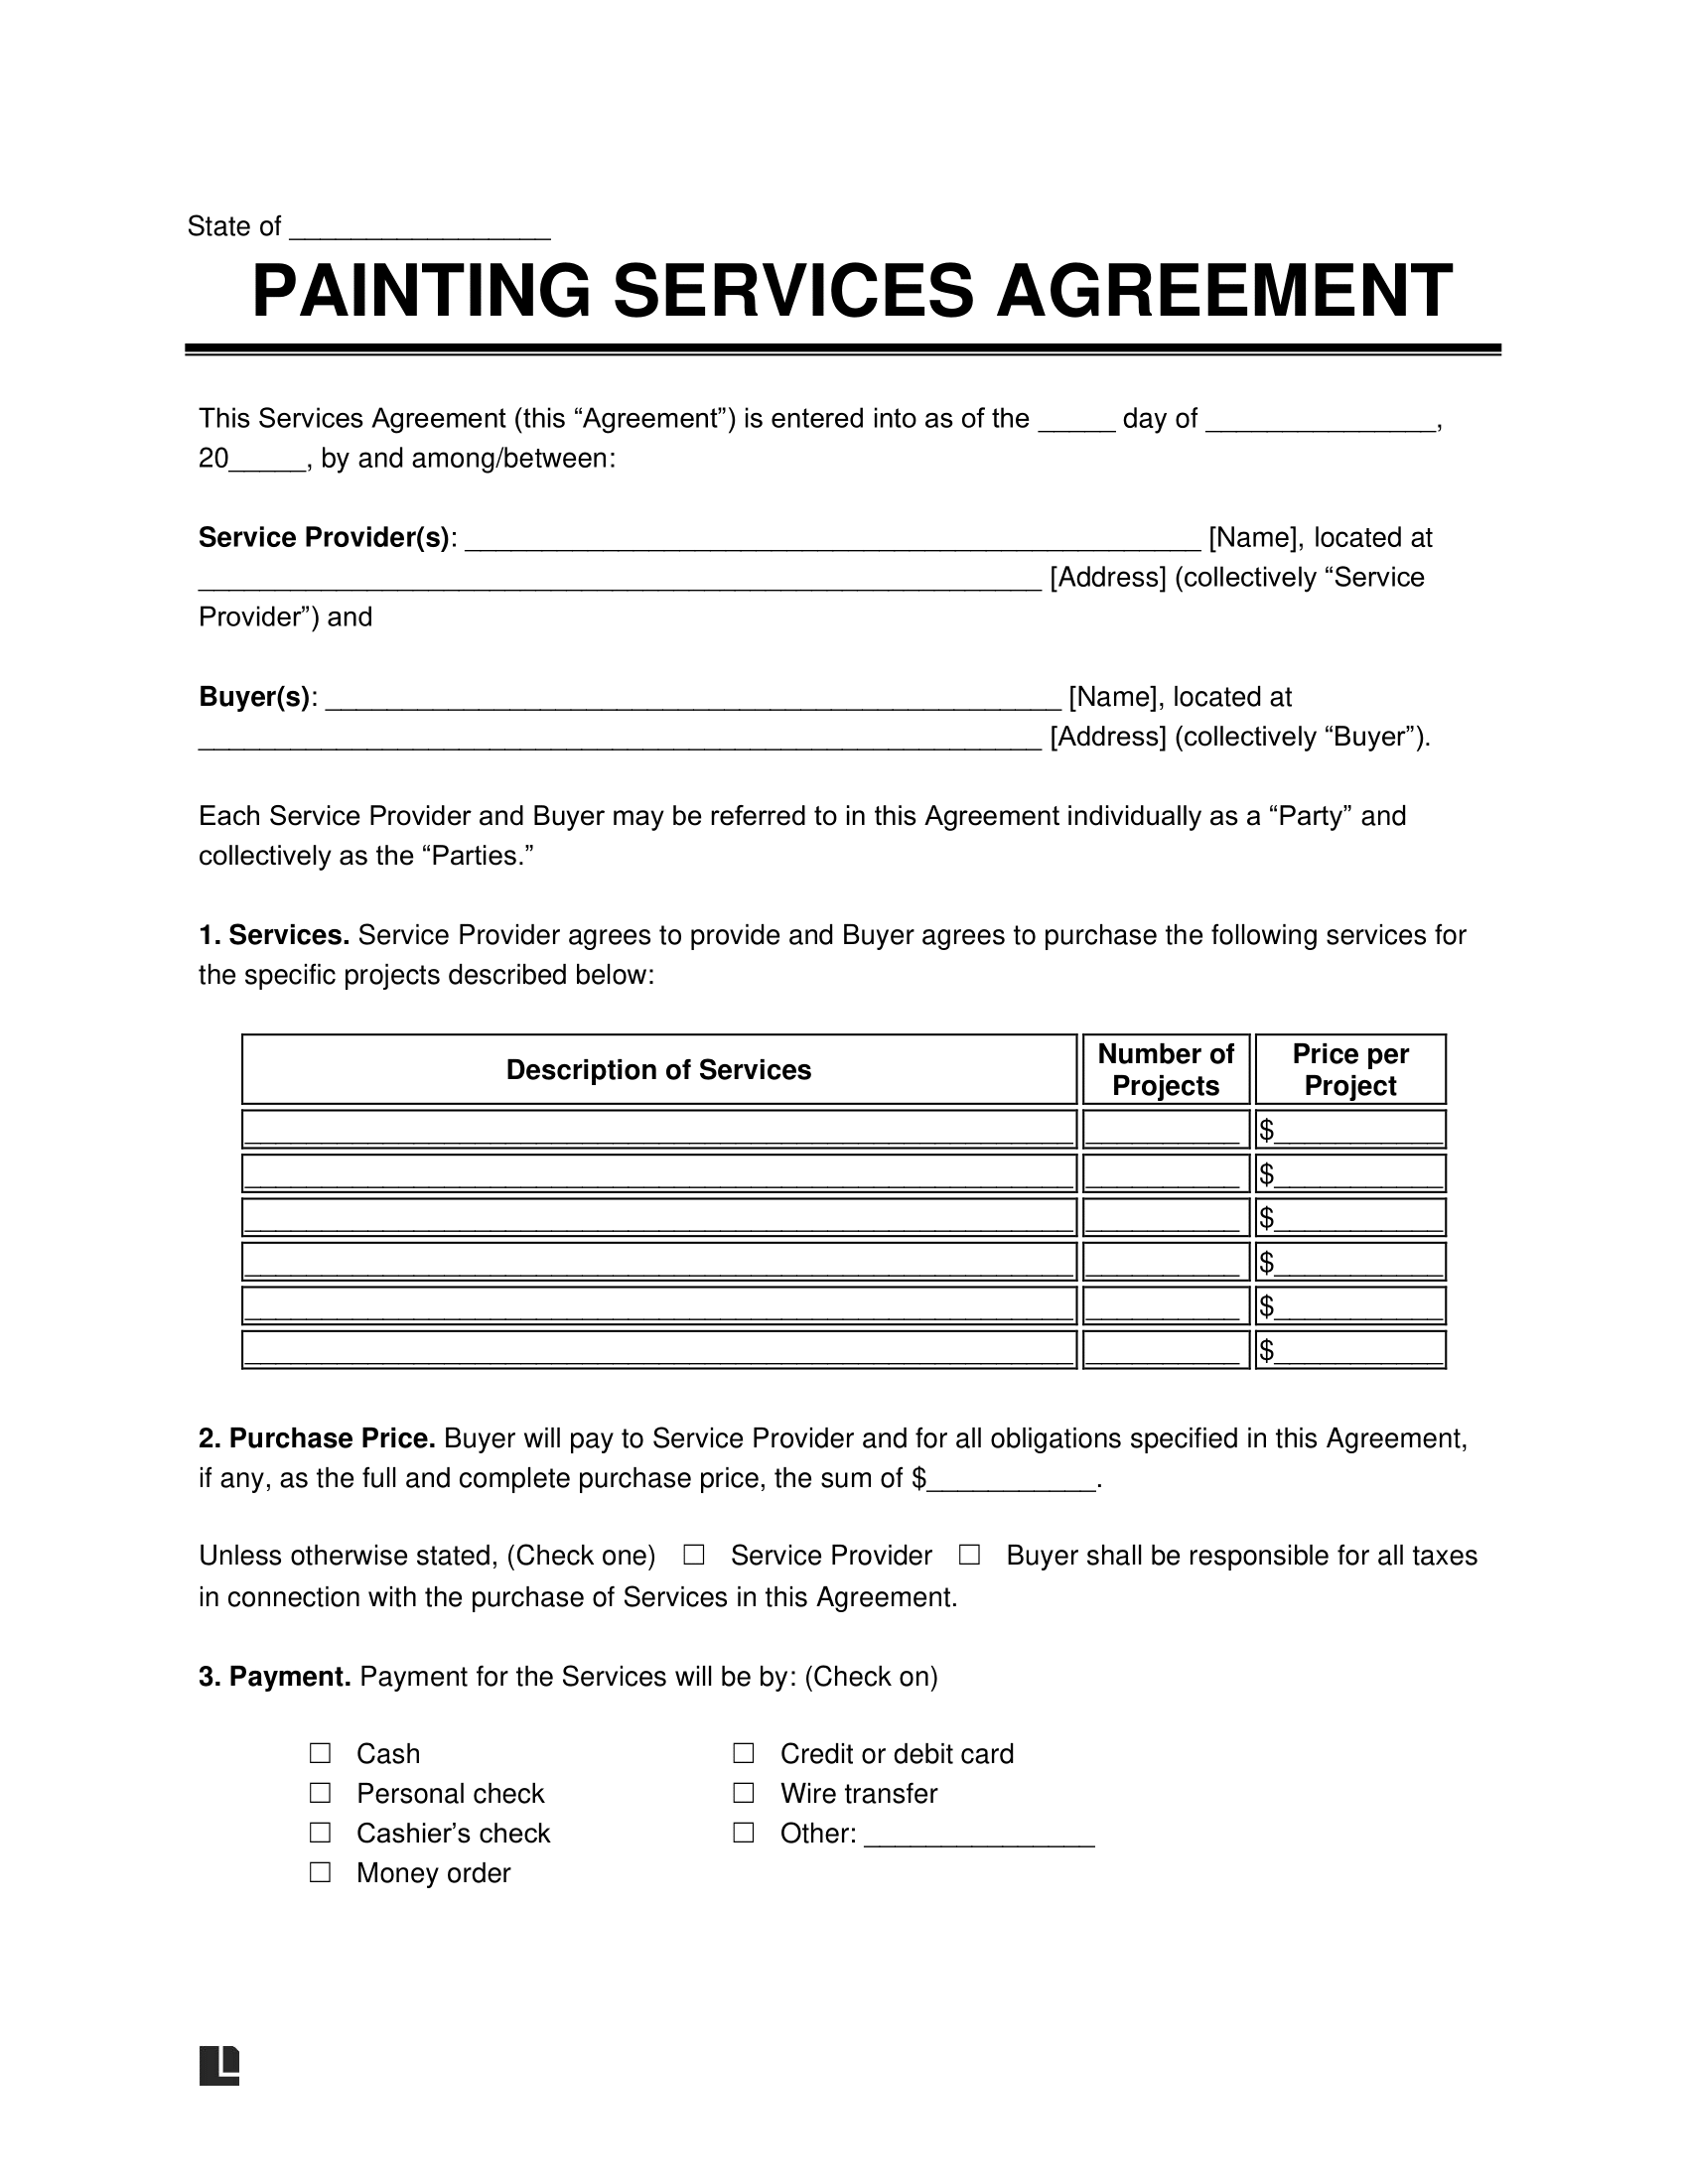 painting service agreement